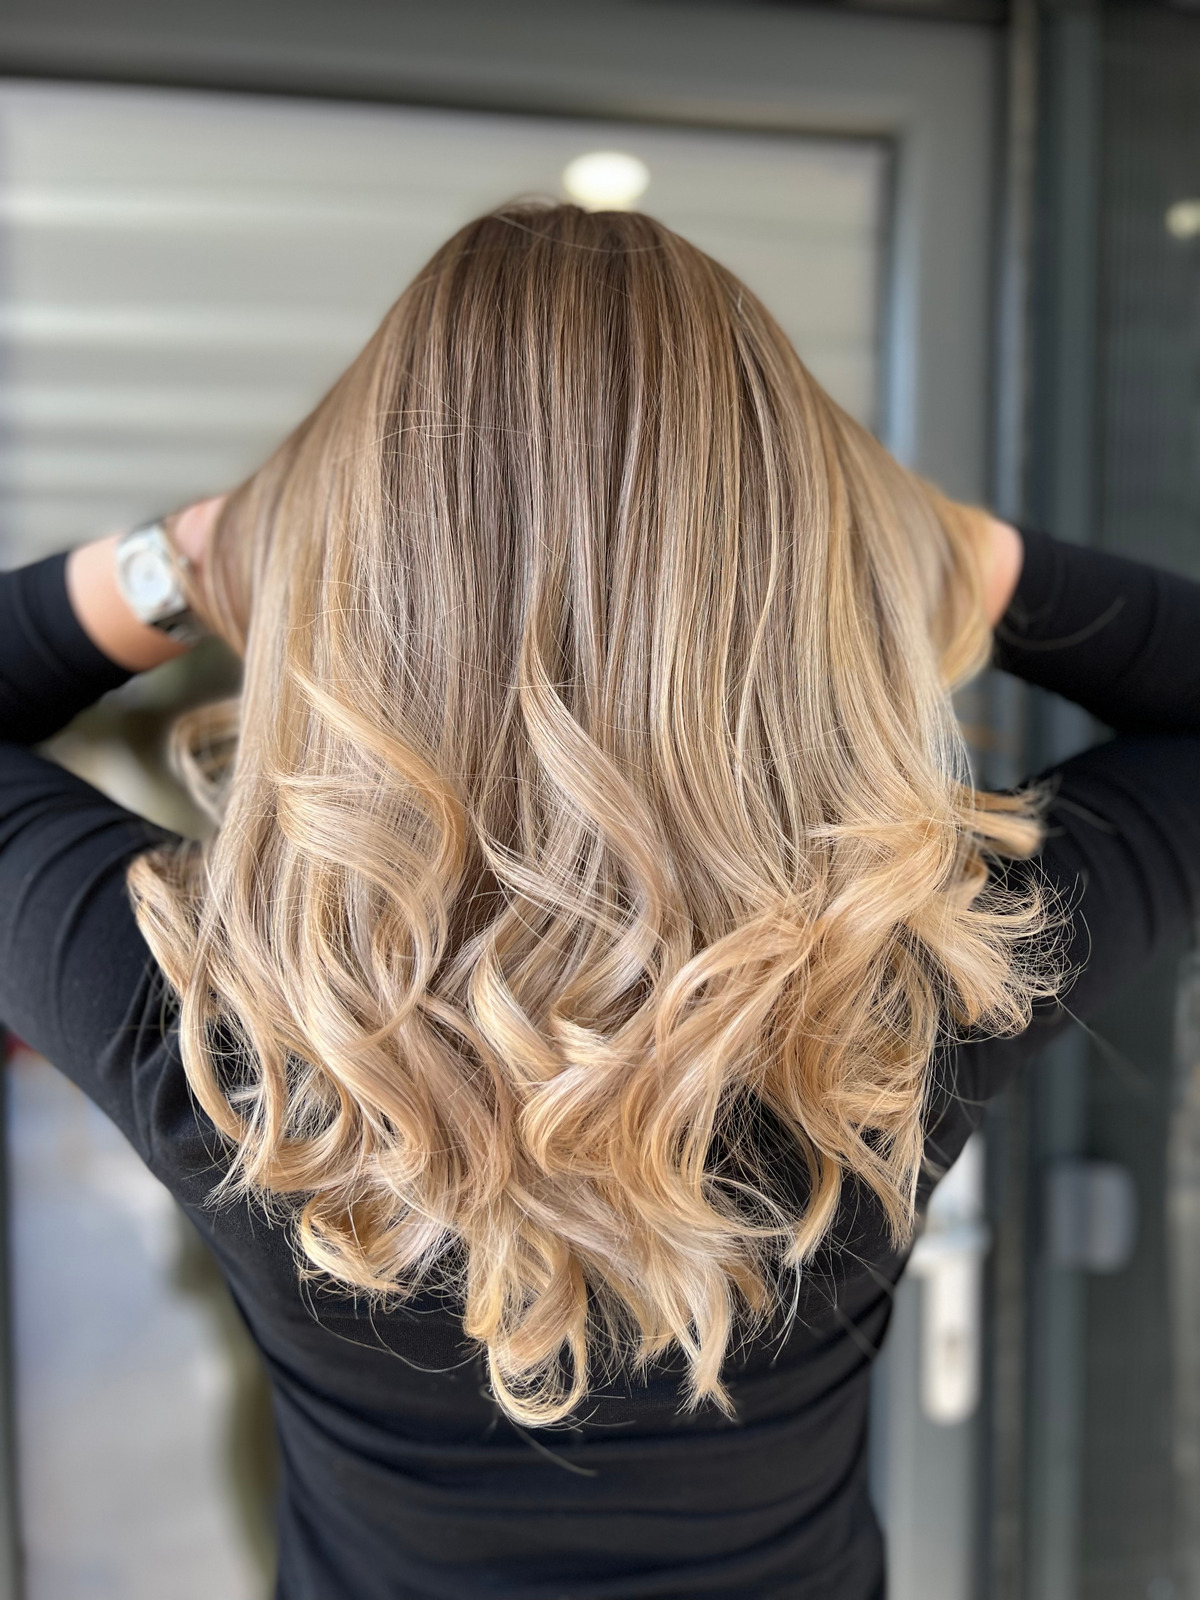 Balayage hair technique, with a beautiful warm blonde